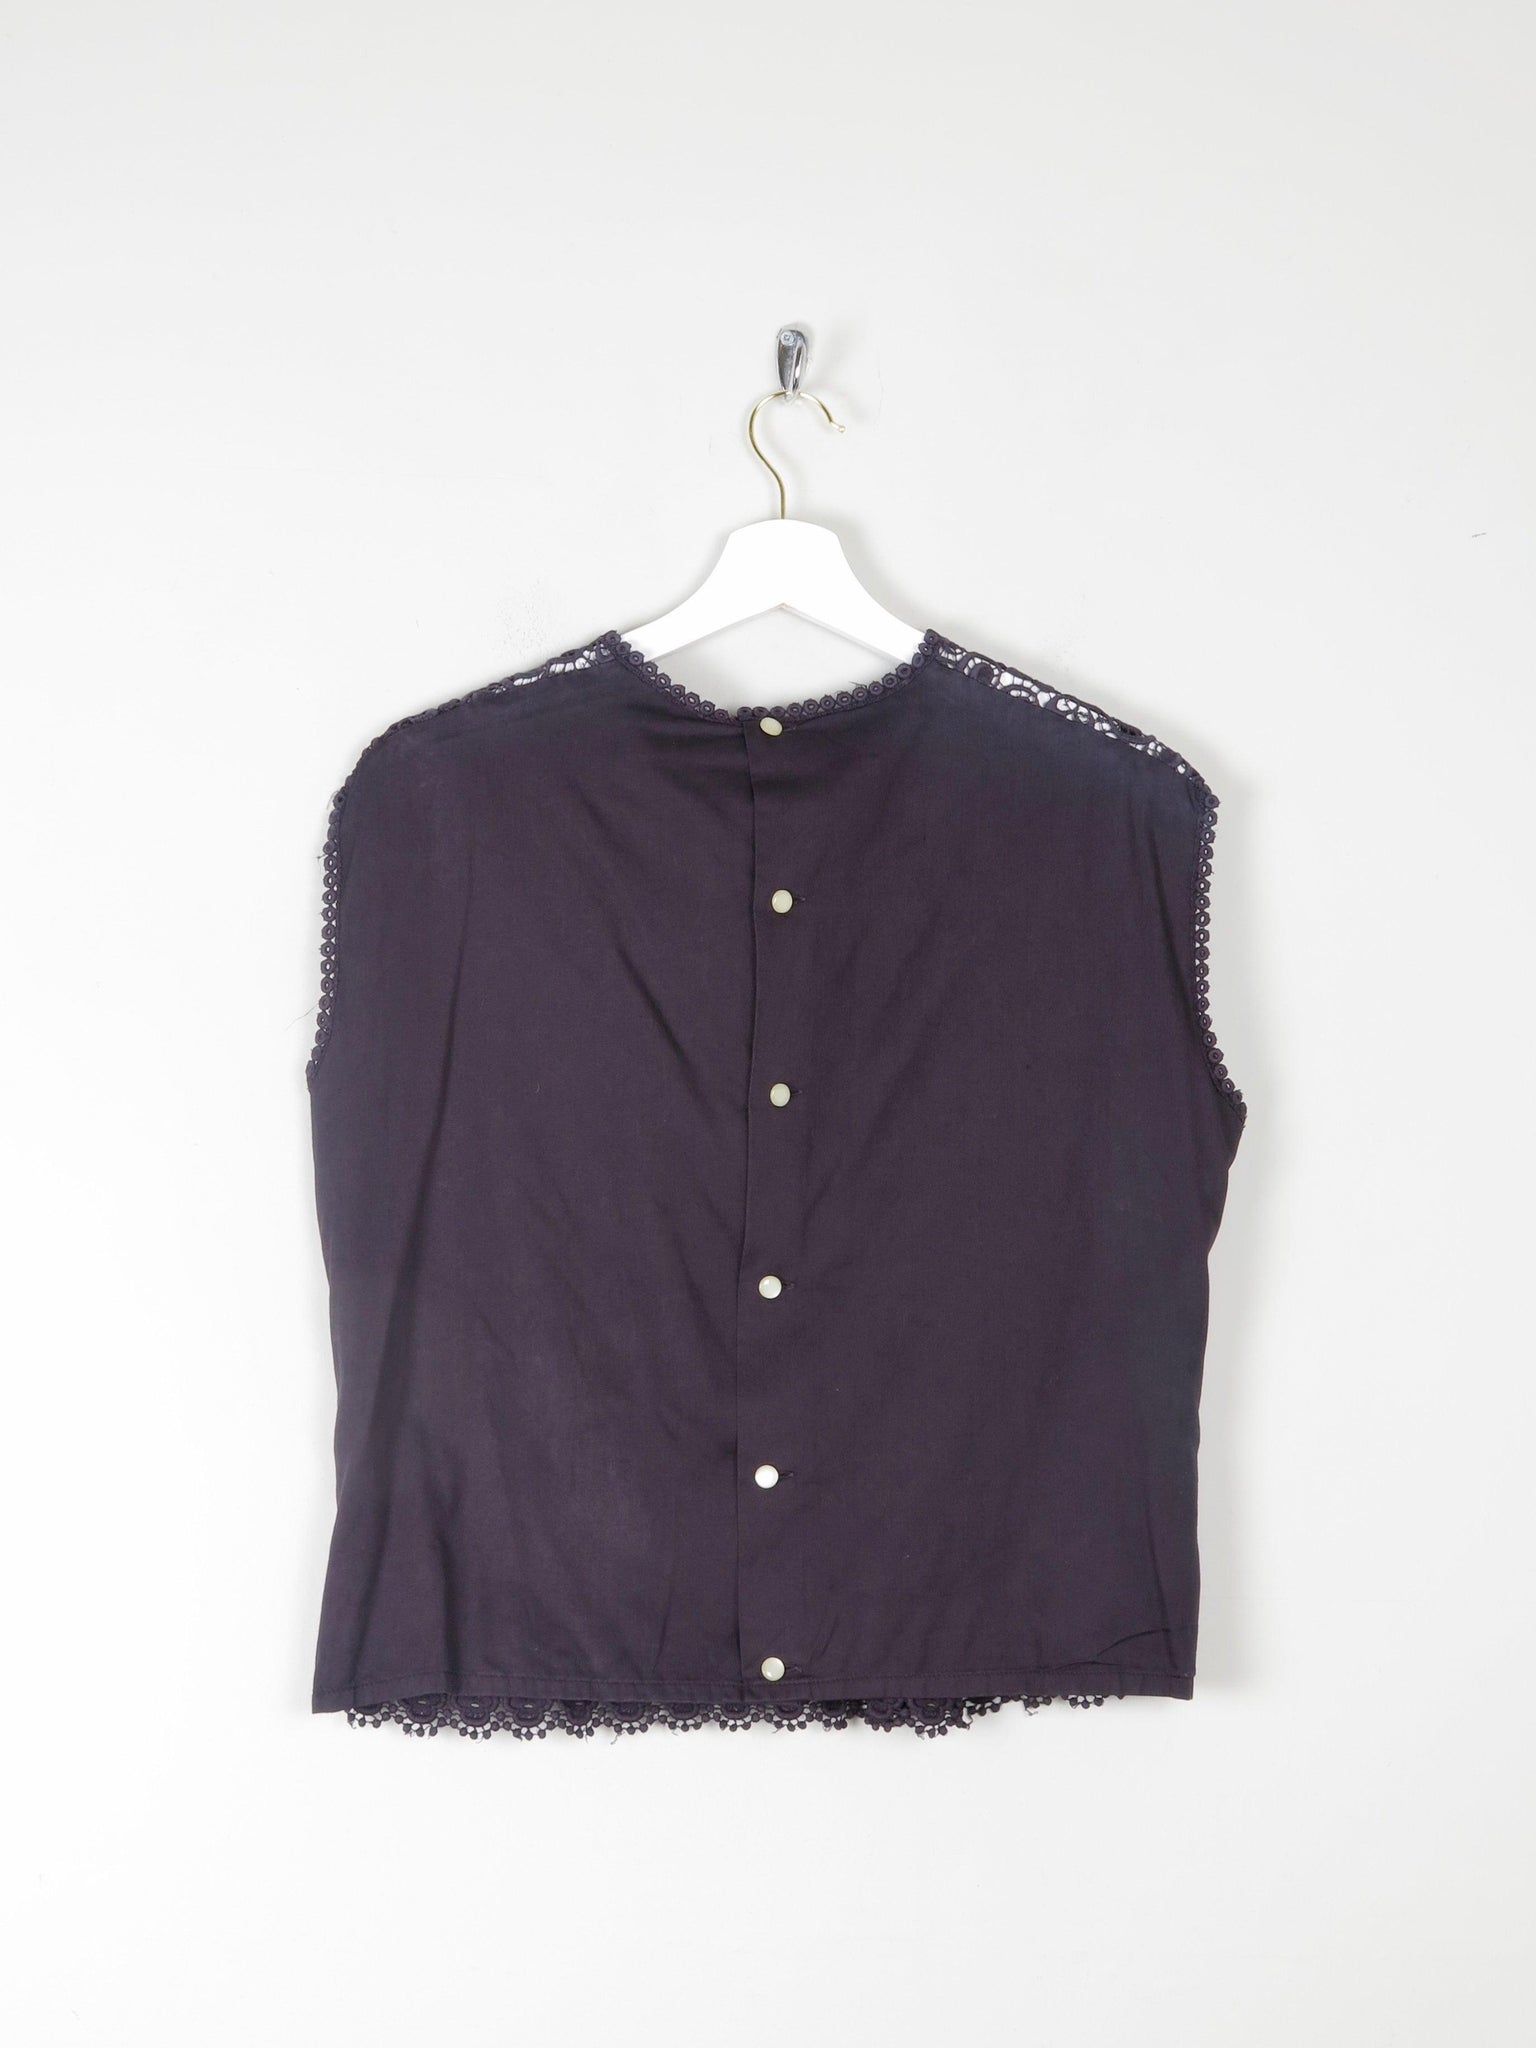 Women's Charcoal Cotton & Lace Blouse 10/12 - The Harlequin